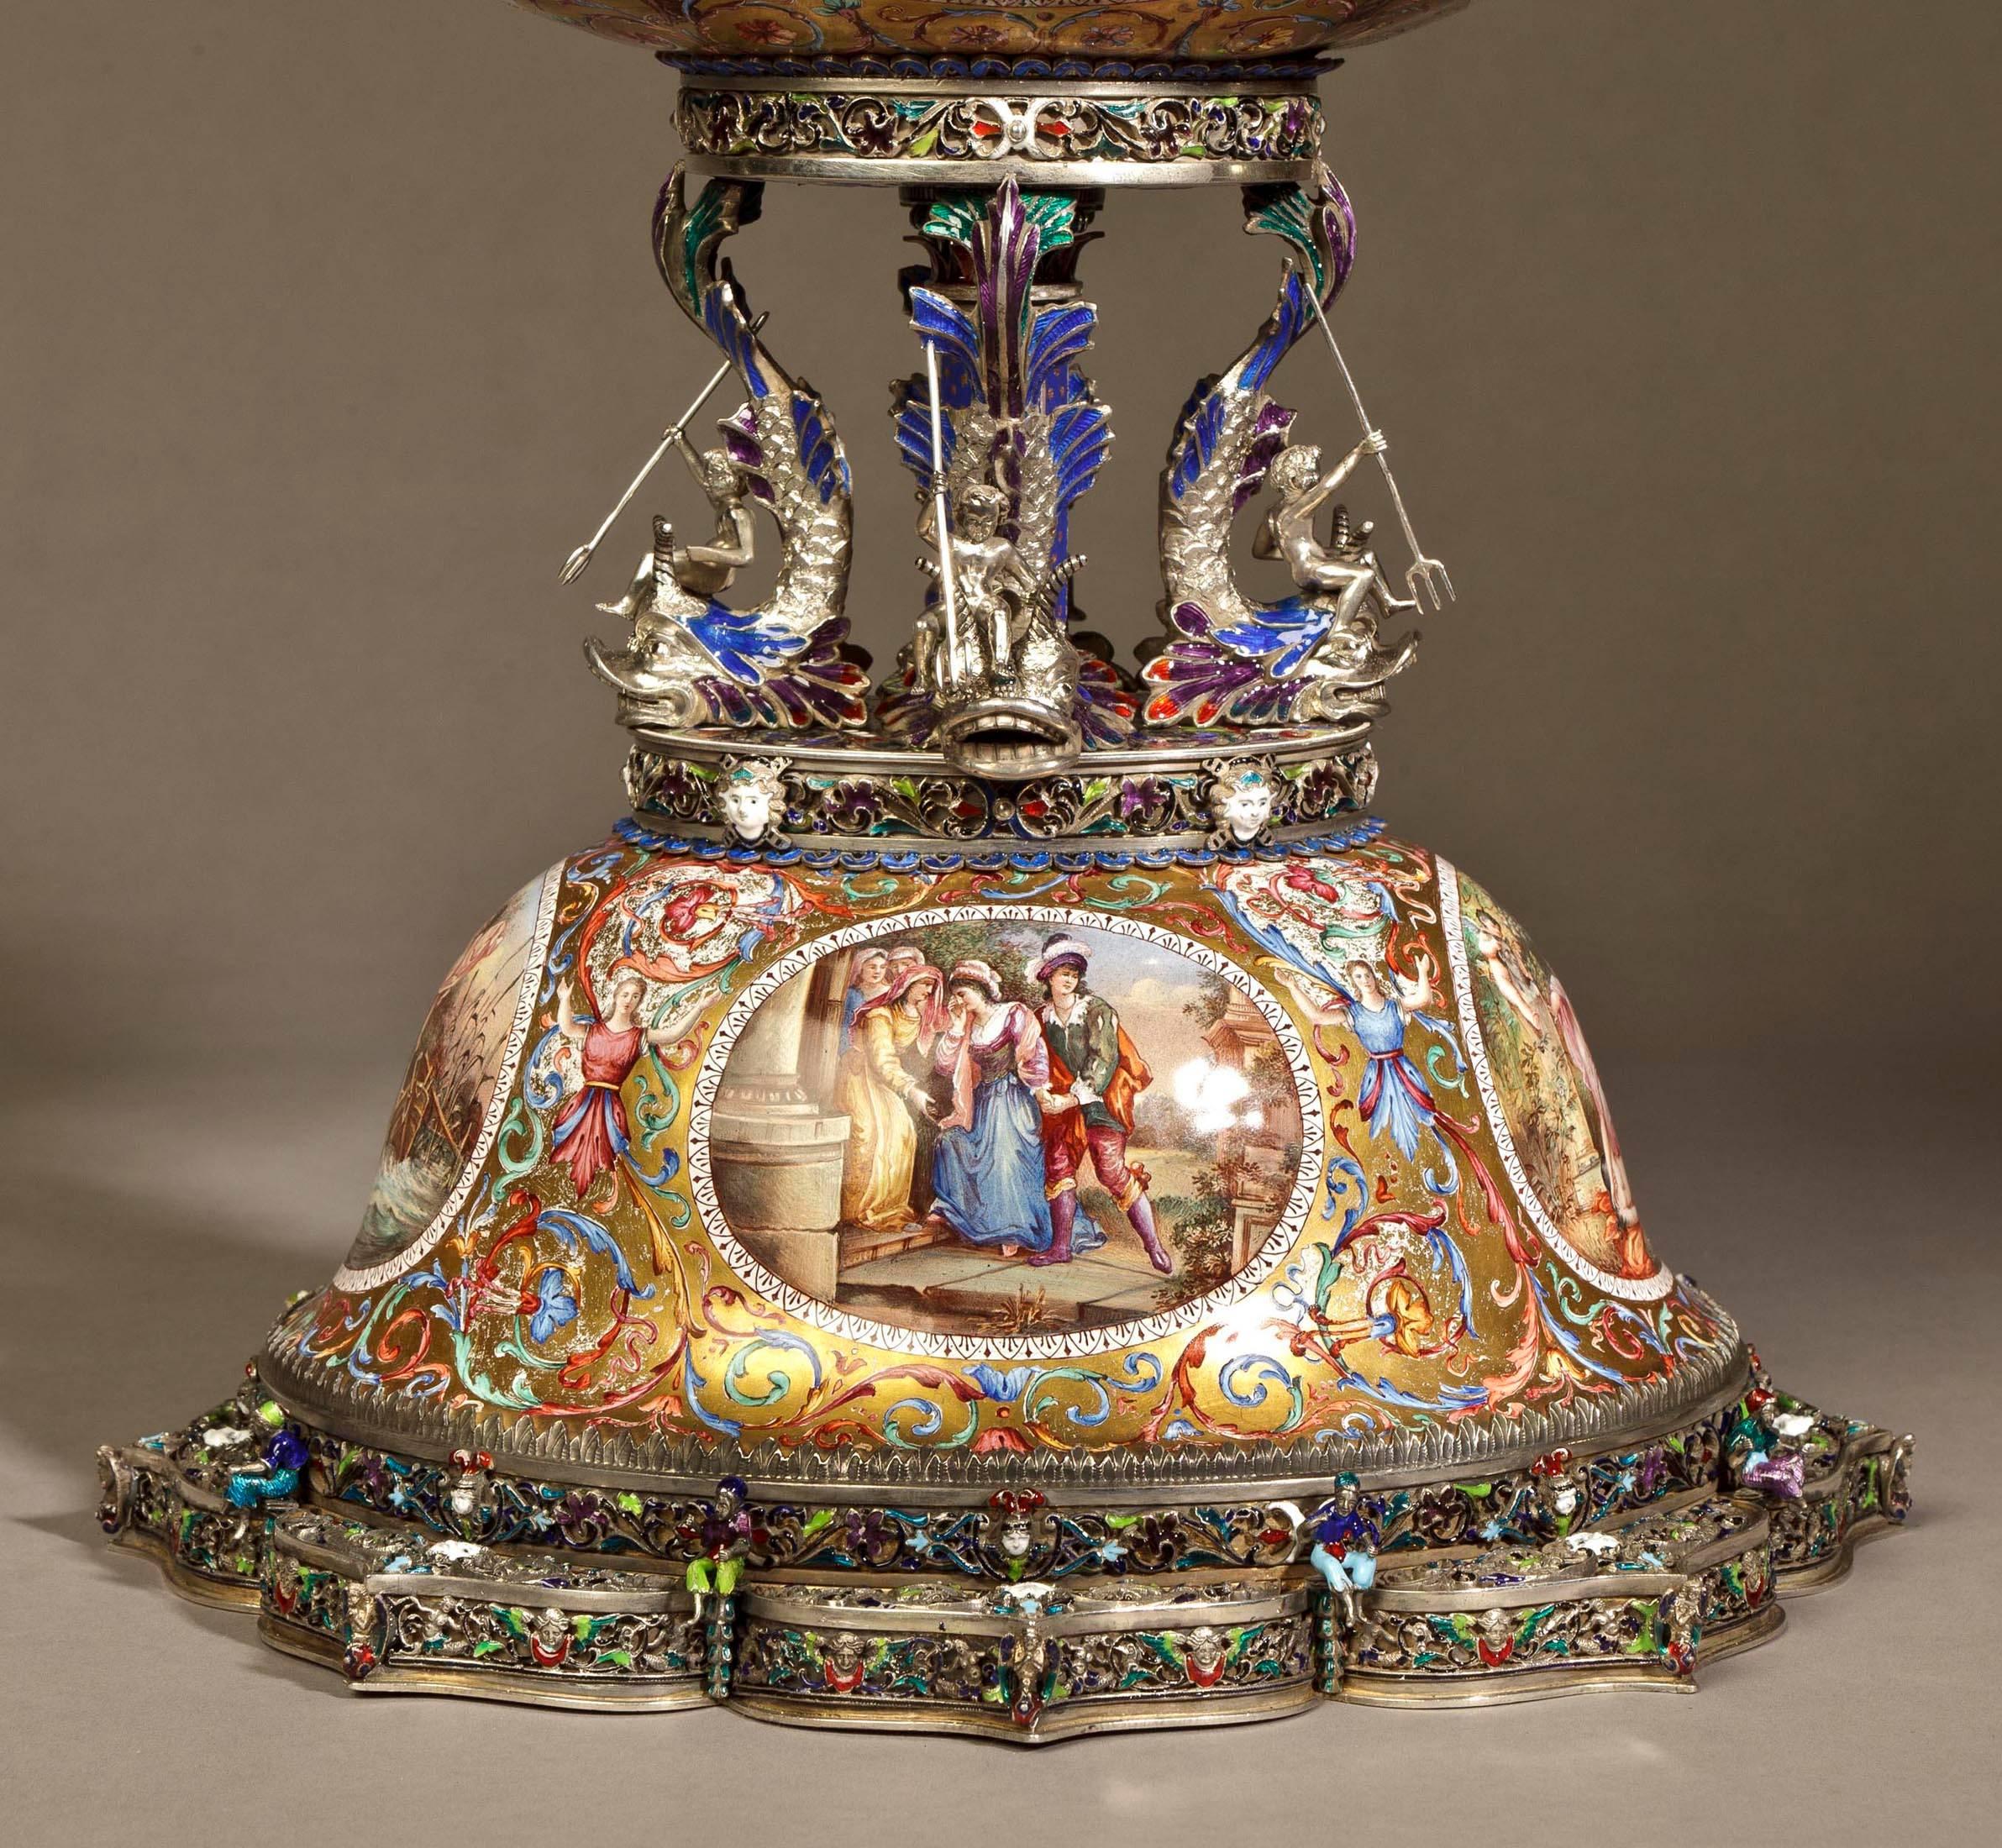 Renaissance Revival 19th Century Viennese Nef of Silver and Enamel by Hermann Böhm